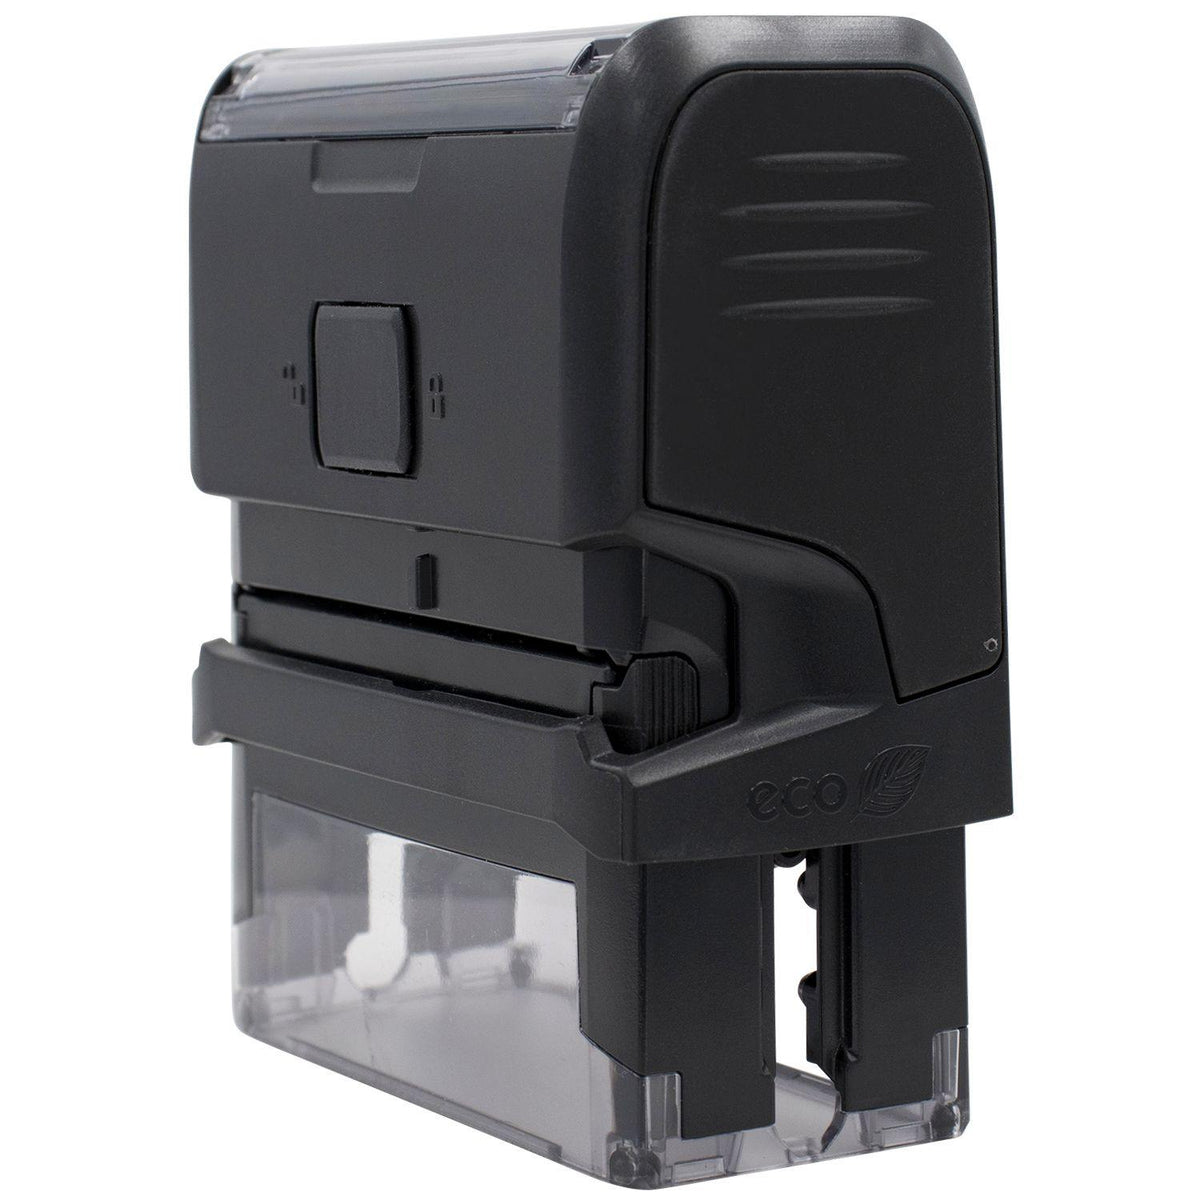 Self Inking Hmo Ppo Stamp - Engineer Seal Stamps - Brand_Trodat, Impression Size_Small, Stamp Type_Self-Inking Stamp, Type of Use_Medical Office